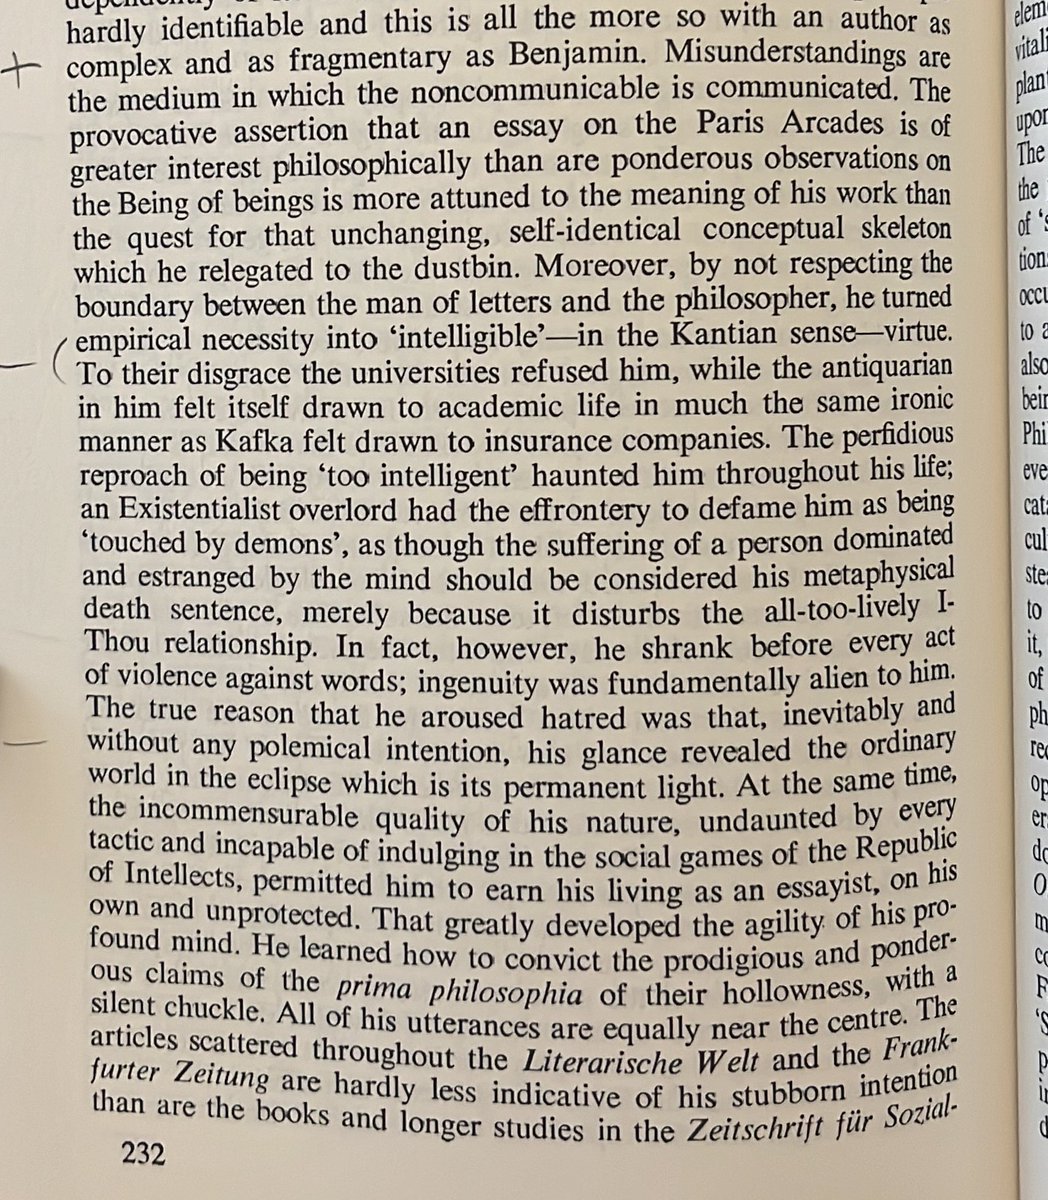 Adorno’s eulogizing of Benjamin. “Misunderstandings are the medium in which the noncommunicable is communicated.” “His glance revealed the ordinary world in the eclipse which is its permanent light.” Every page is like this.